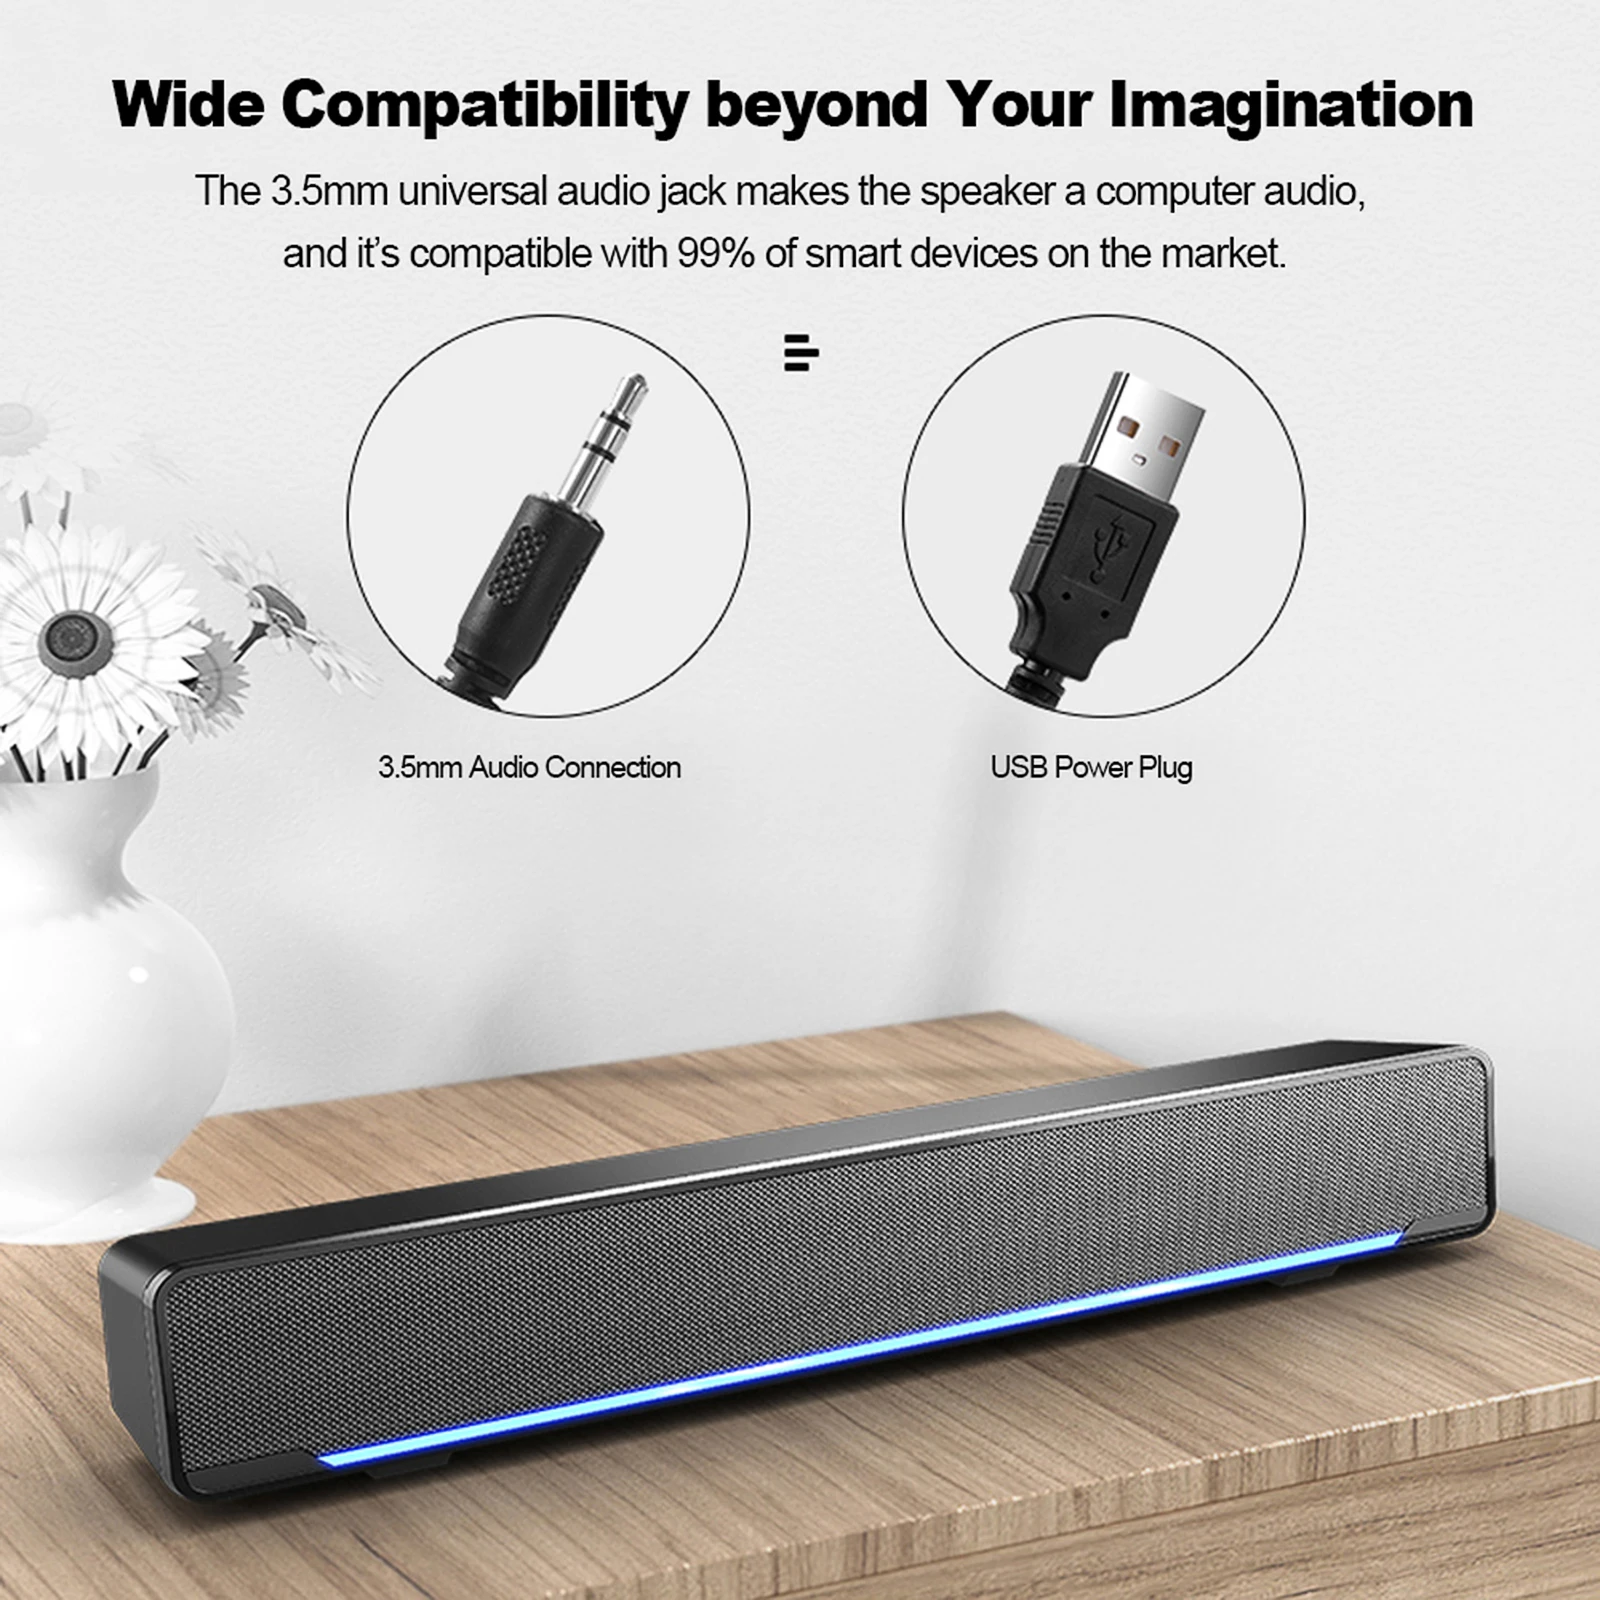 SADA V-196 Computer Speaker 3.5mm USB Wired Stereo Subwoofer Powerful Music Player Bass Surround Sound Box for PC Laptop images - 6